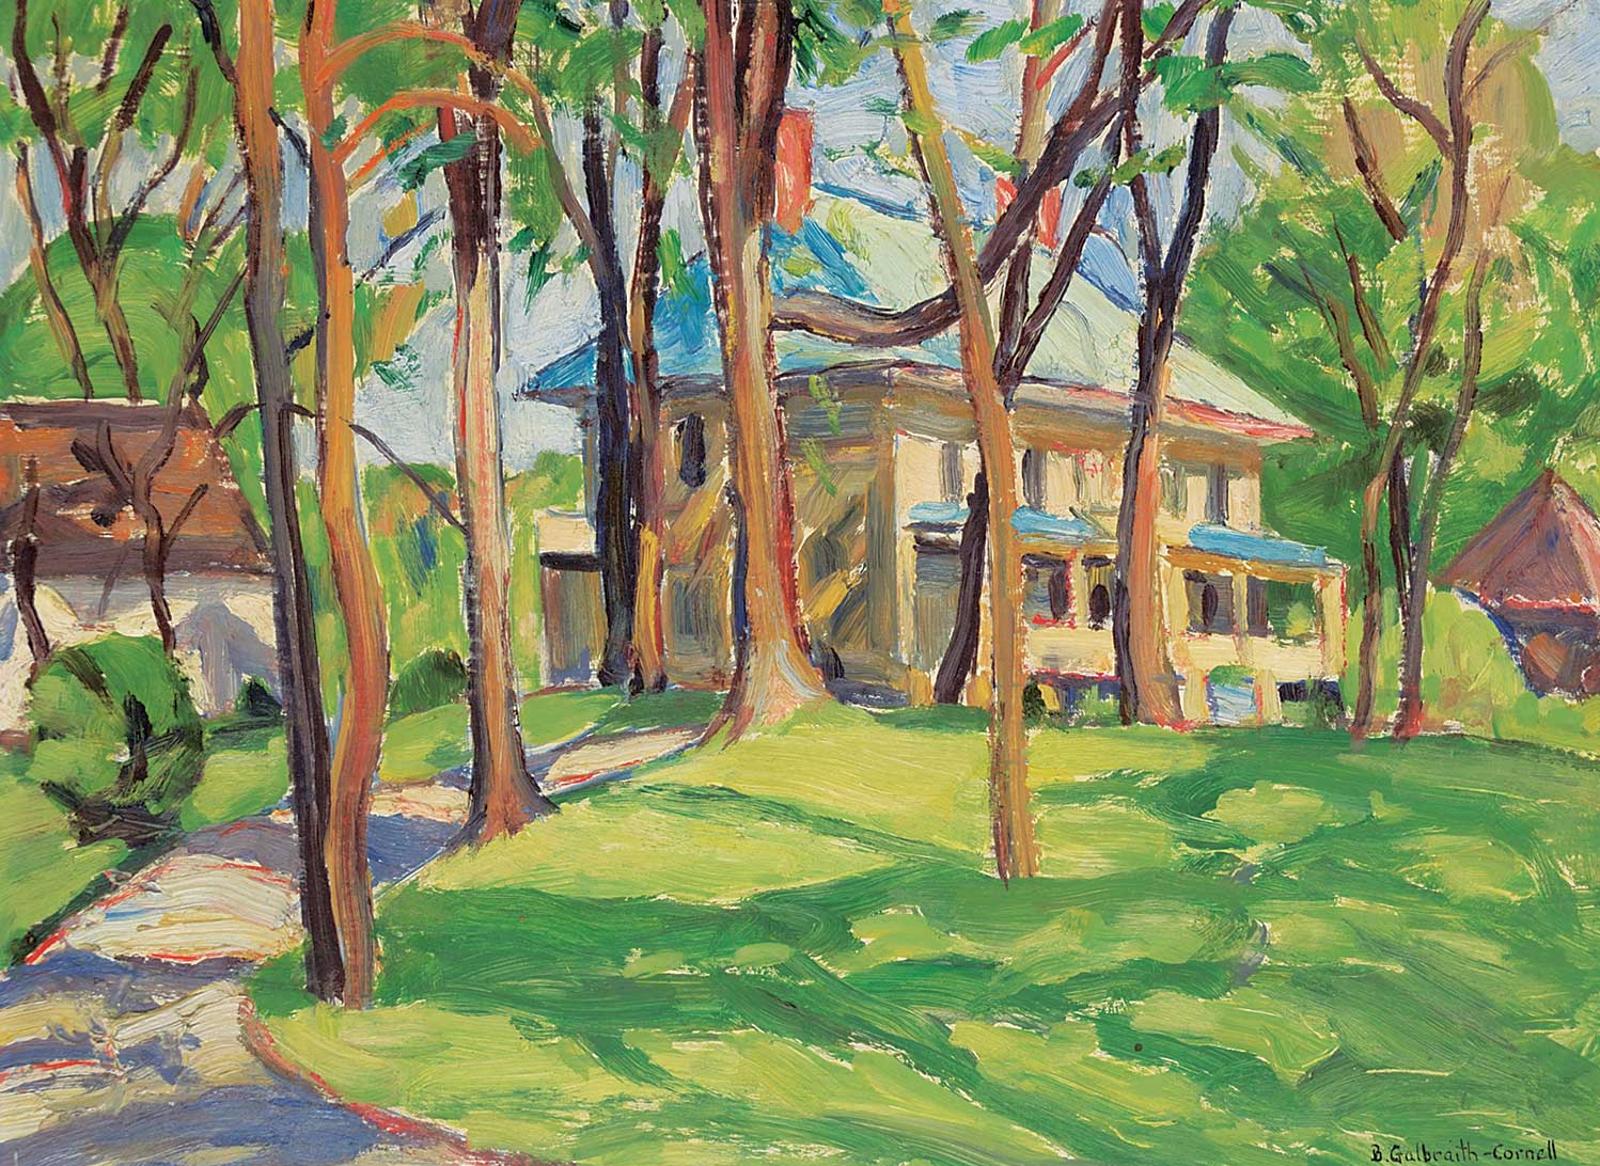 Betty Galbraith-Cornell (1916-2012) - Untitled - Cottage Country